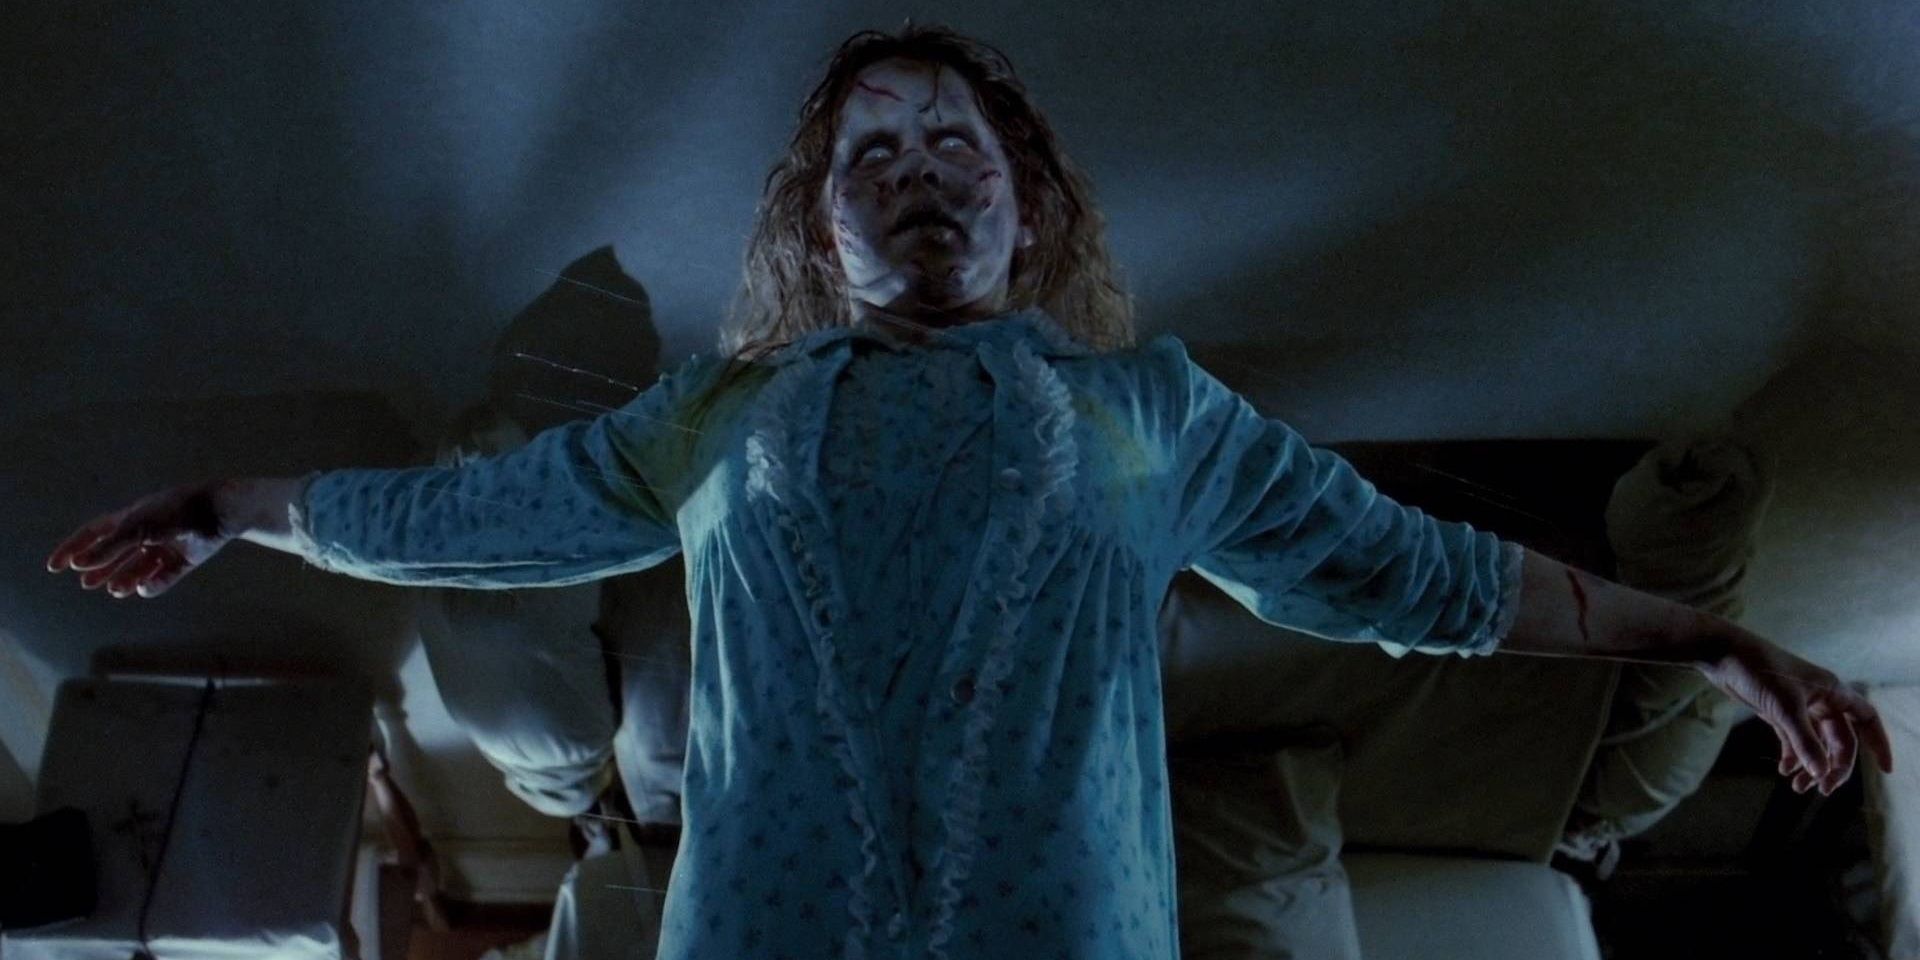 Regan MacNeil hovering above her bed in The Exorcist